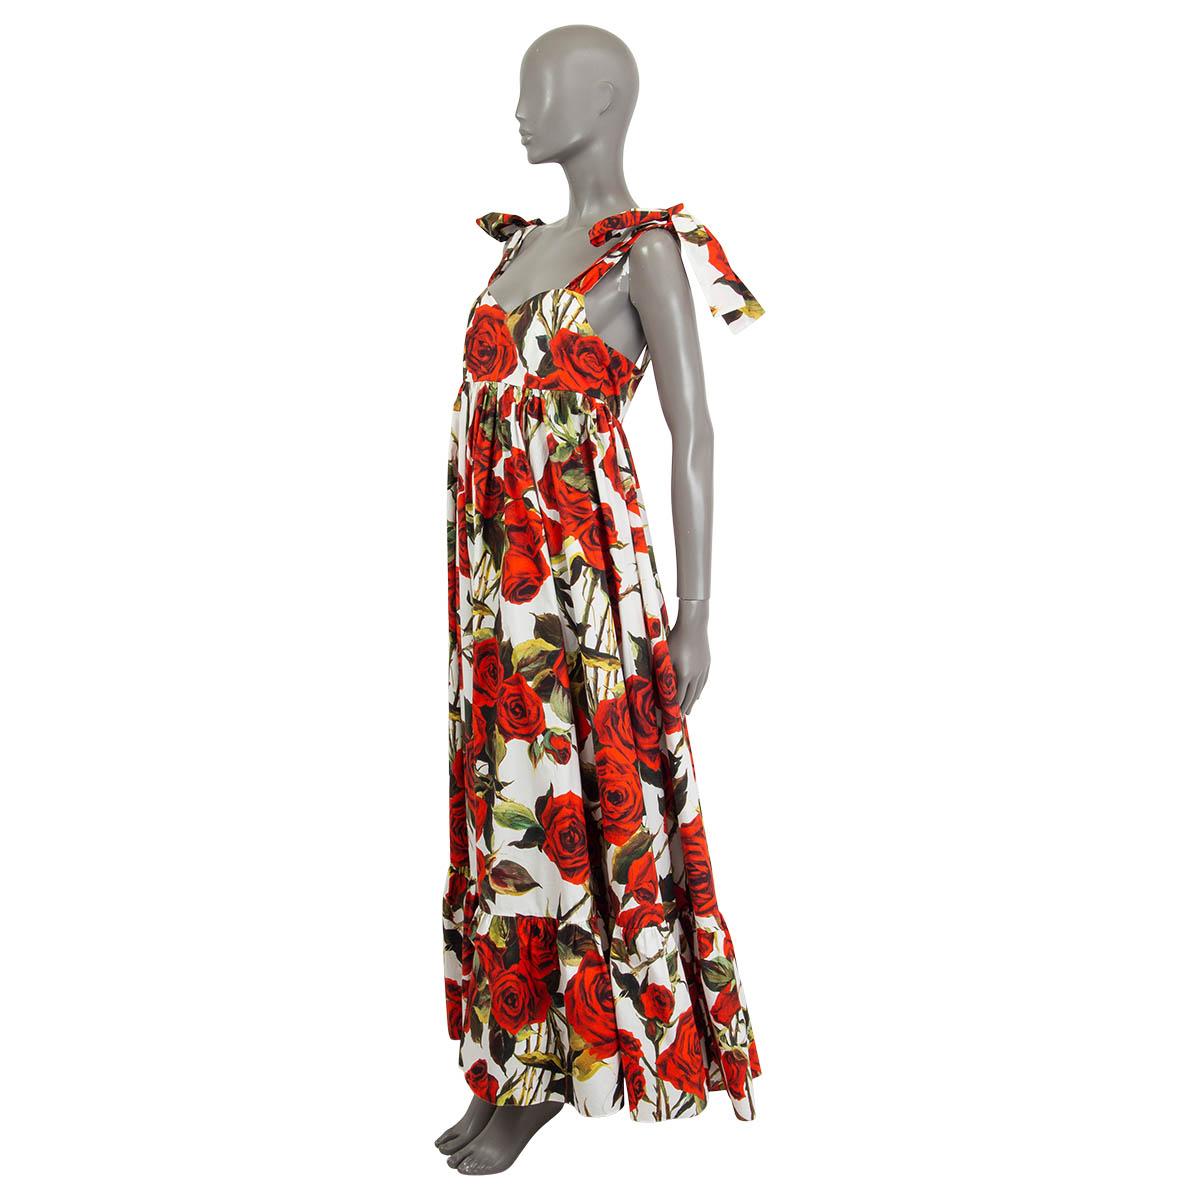 100% authentic Dolce & Gabbana rose print maxi dress in red, green and white cotton (100%). Features self-tie ribbon sleeves. Opens with a concealed zipper and a hook at the back. Unlined. Has white stitches at the front bustier and some stains on